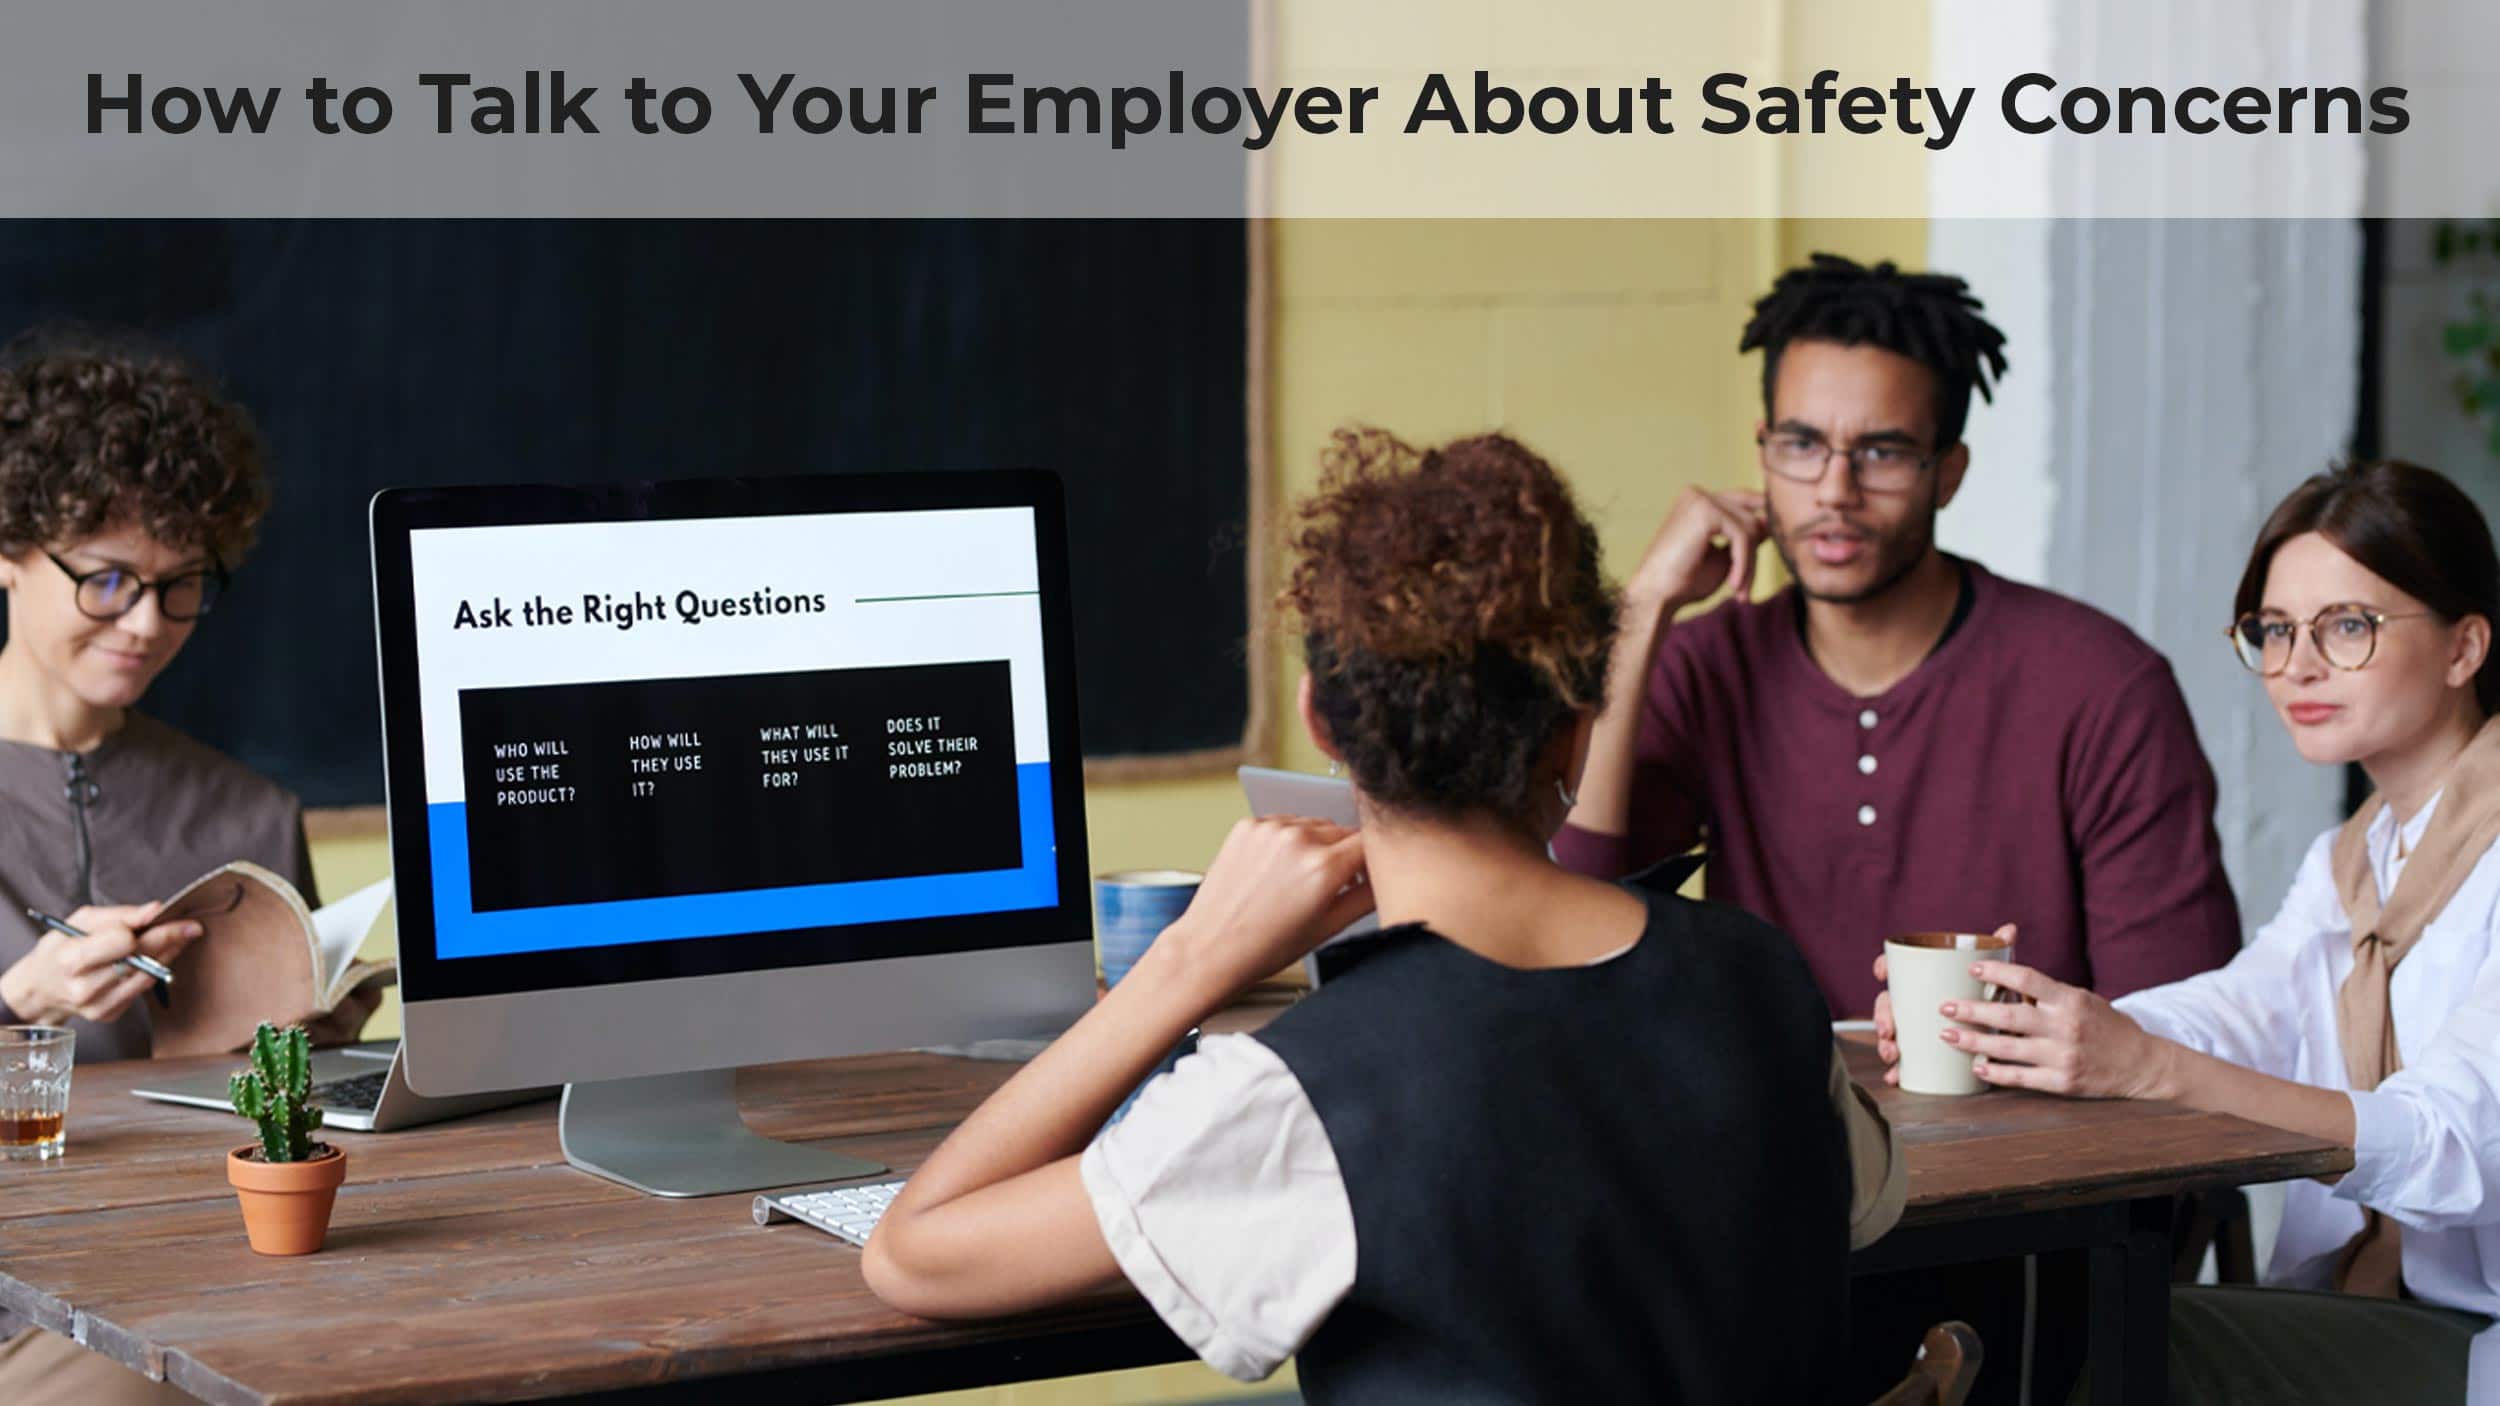 How To Talk to Your Employer About Safety Concerns Header